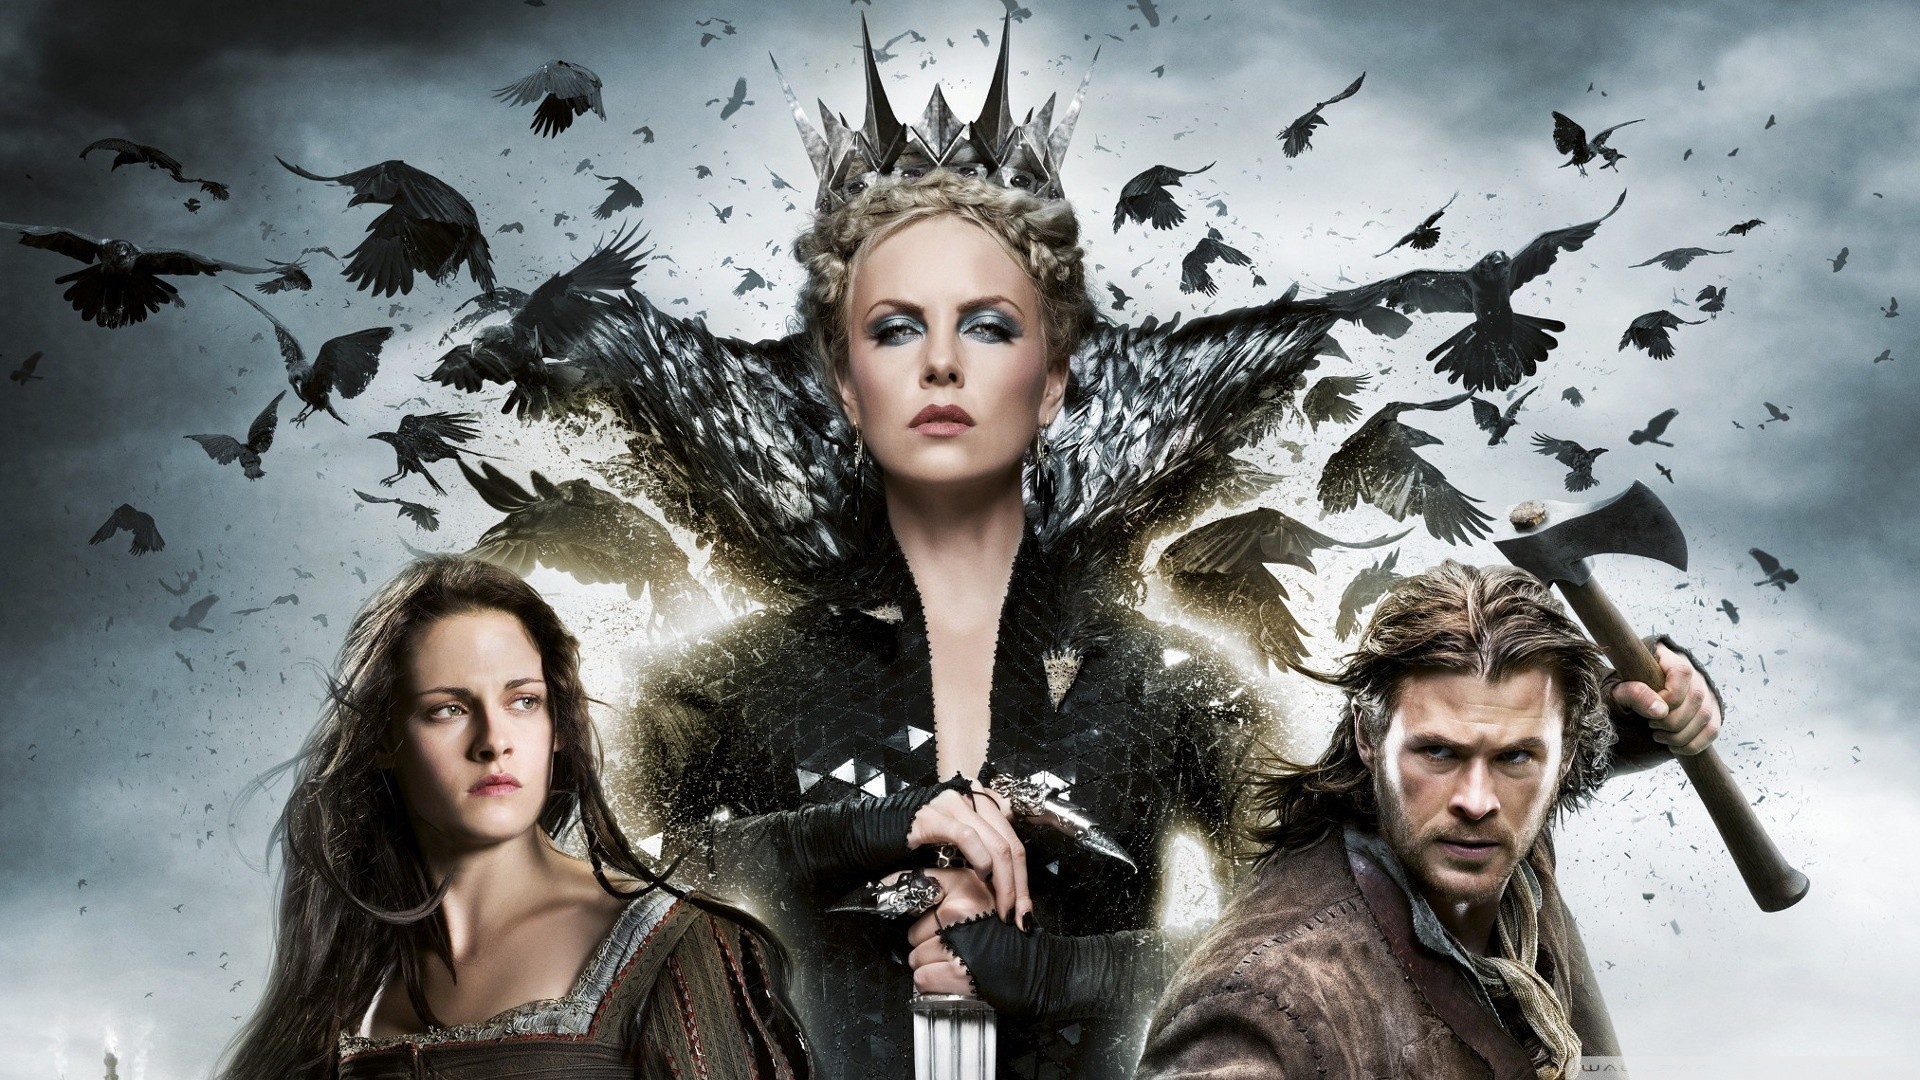 People 1920x1080 Snow White and the Huntsman movies Kristen Stewart Charlize Theron Chris Hemsworth fantasy girl two women men makeup axes birds movie poster